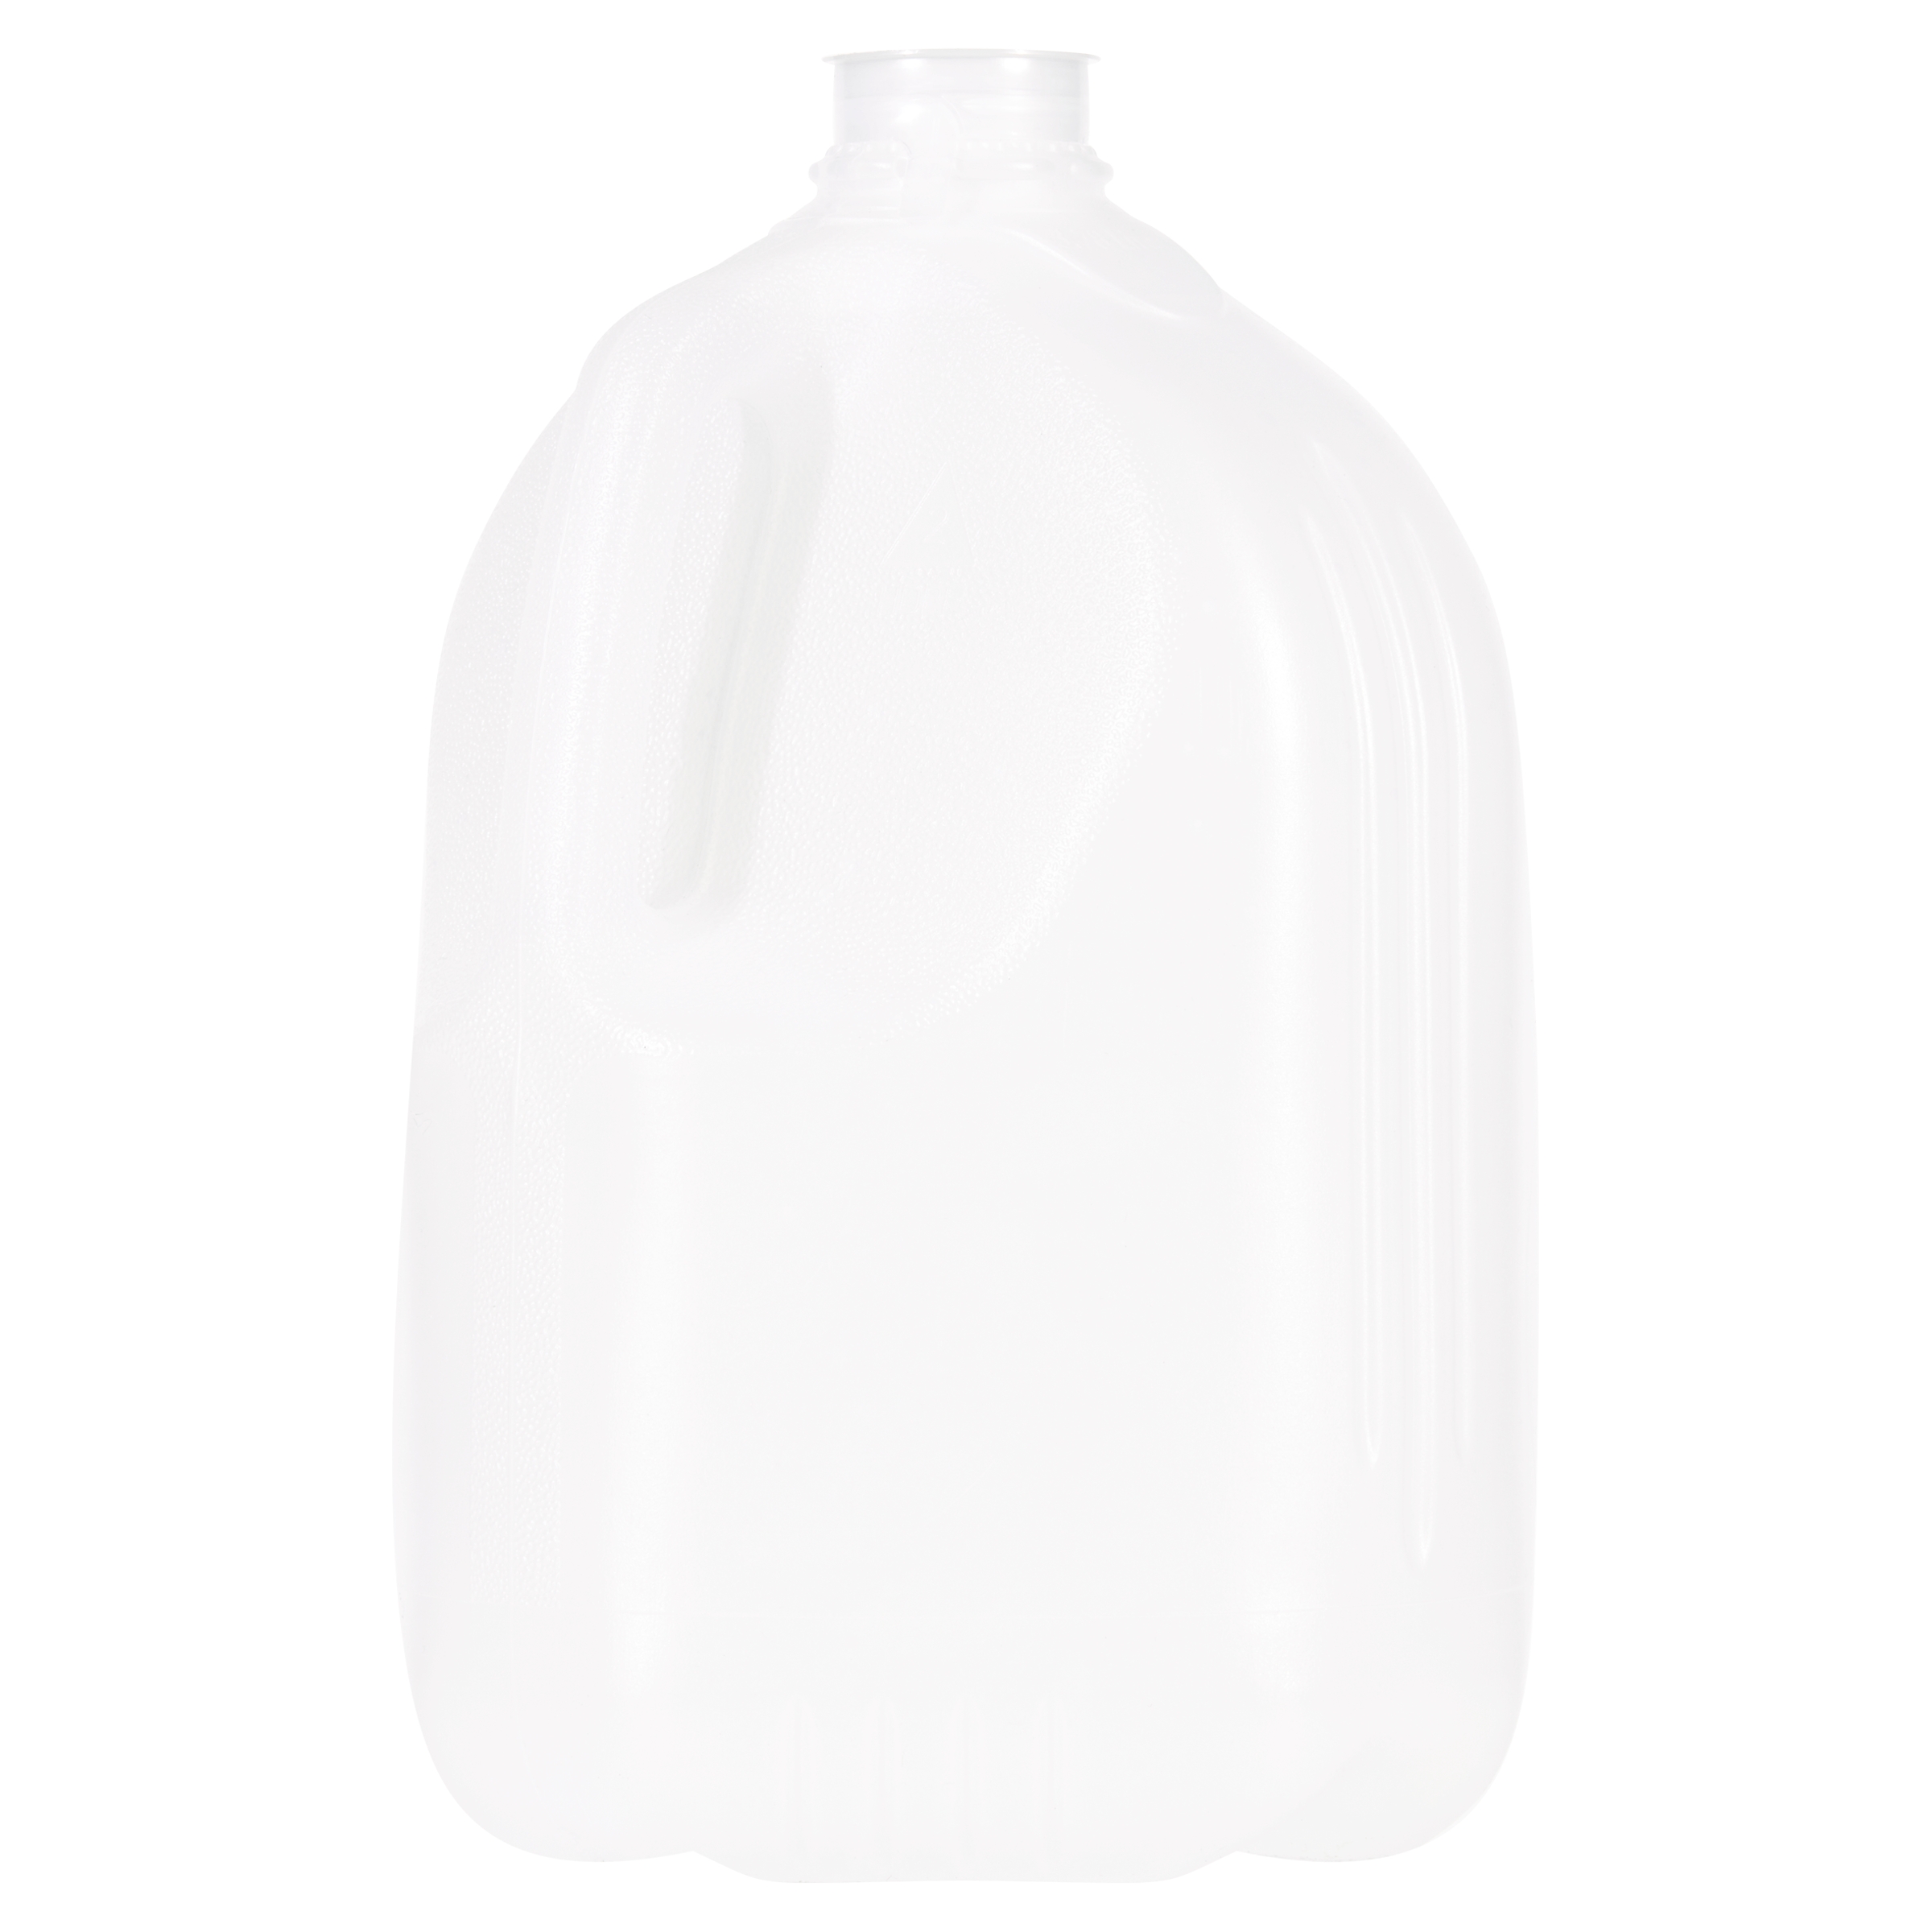 Great Value Spring Water, 1 Gallon - image 5 of 7